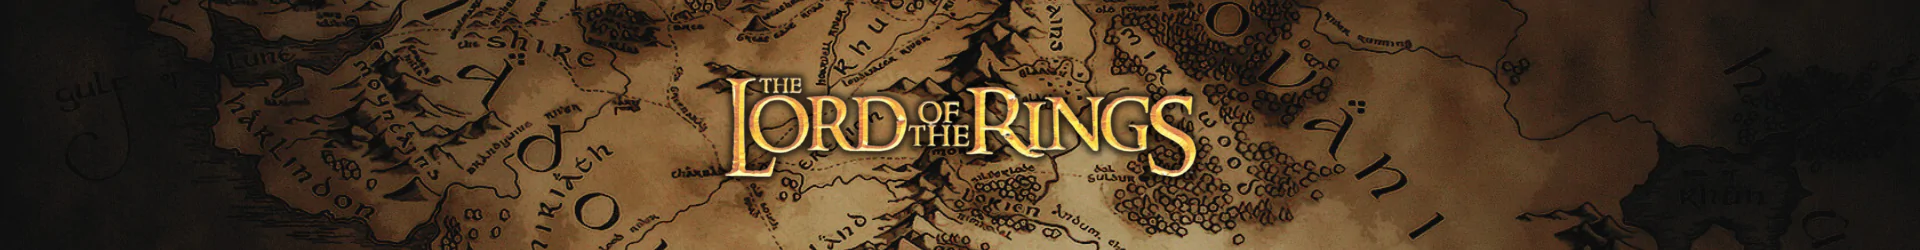 Lord of the Rings schmucke banner